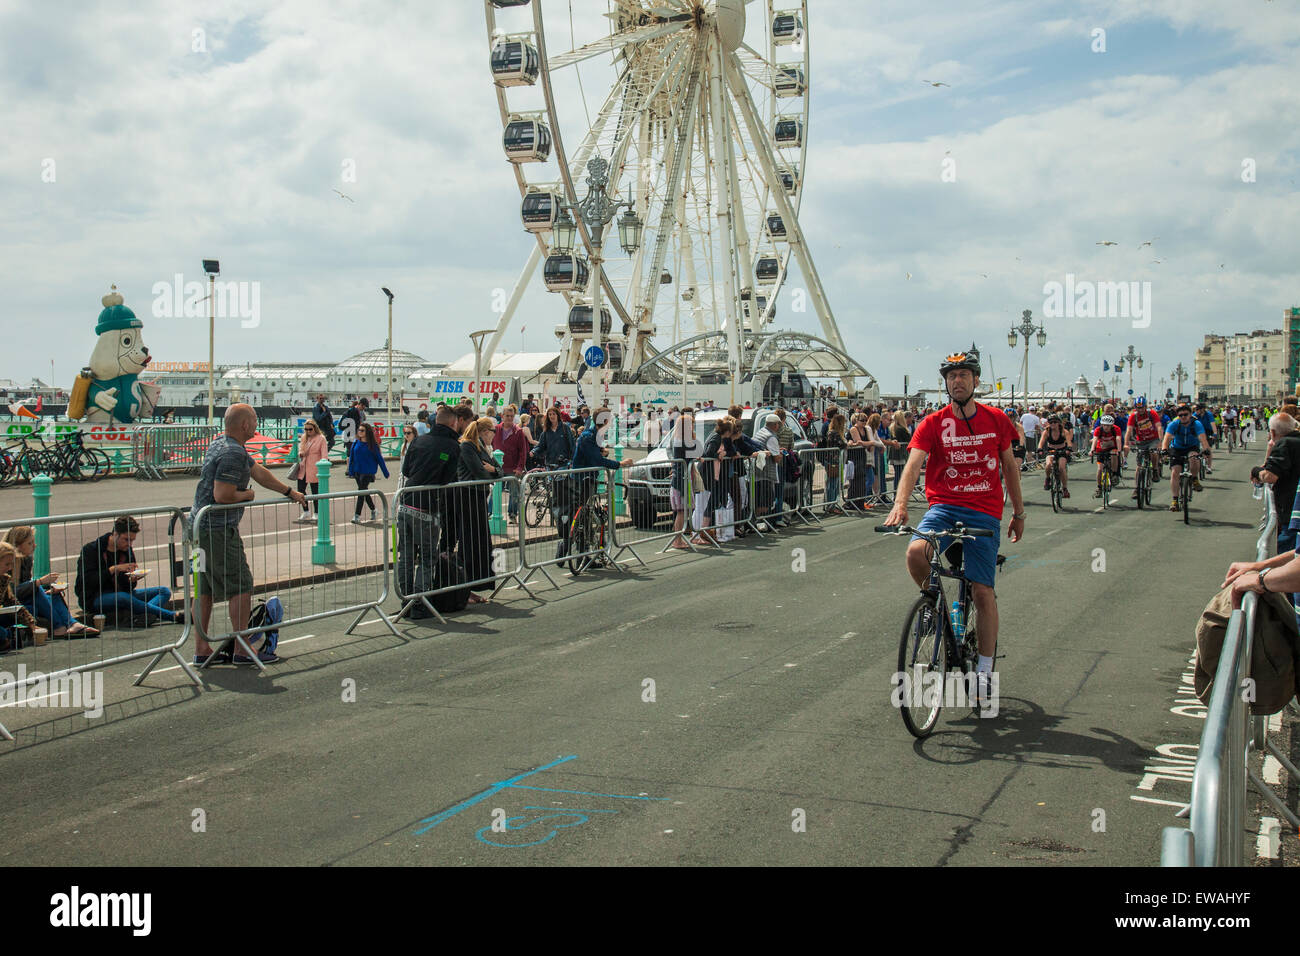 Brighton, UK. 21st June, 2015. Cyclists head for the finish line on Brighton seafront.  Onlookers stand at the barriers. Brighton Wheel in the distance. Credit:  Slawek Staszczuk/Alamy Live News Stock Photo